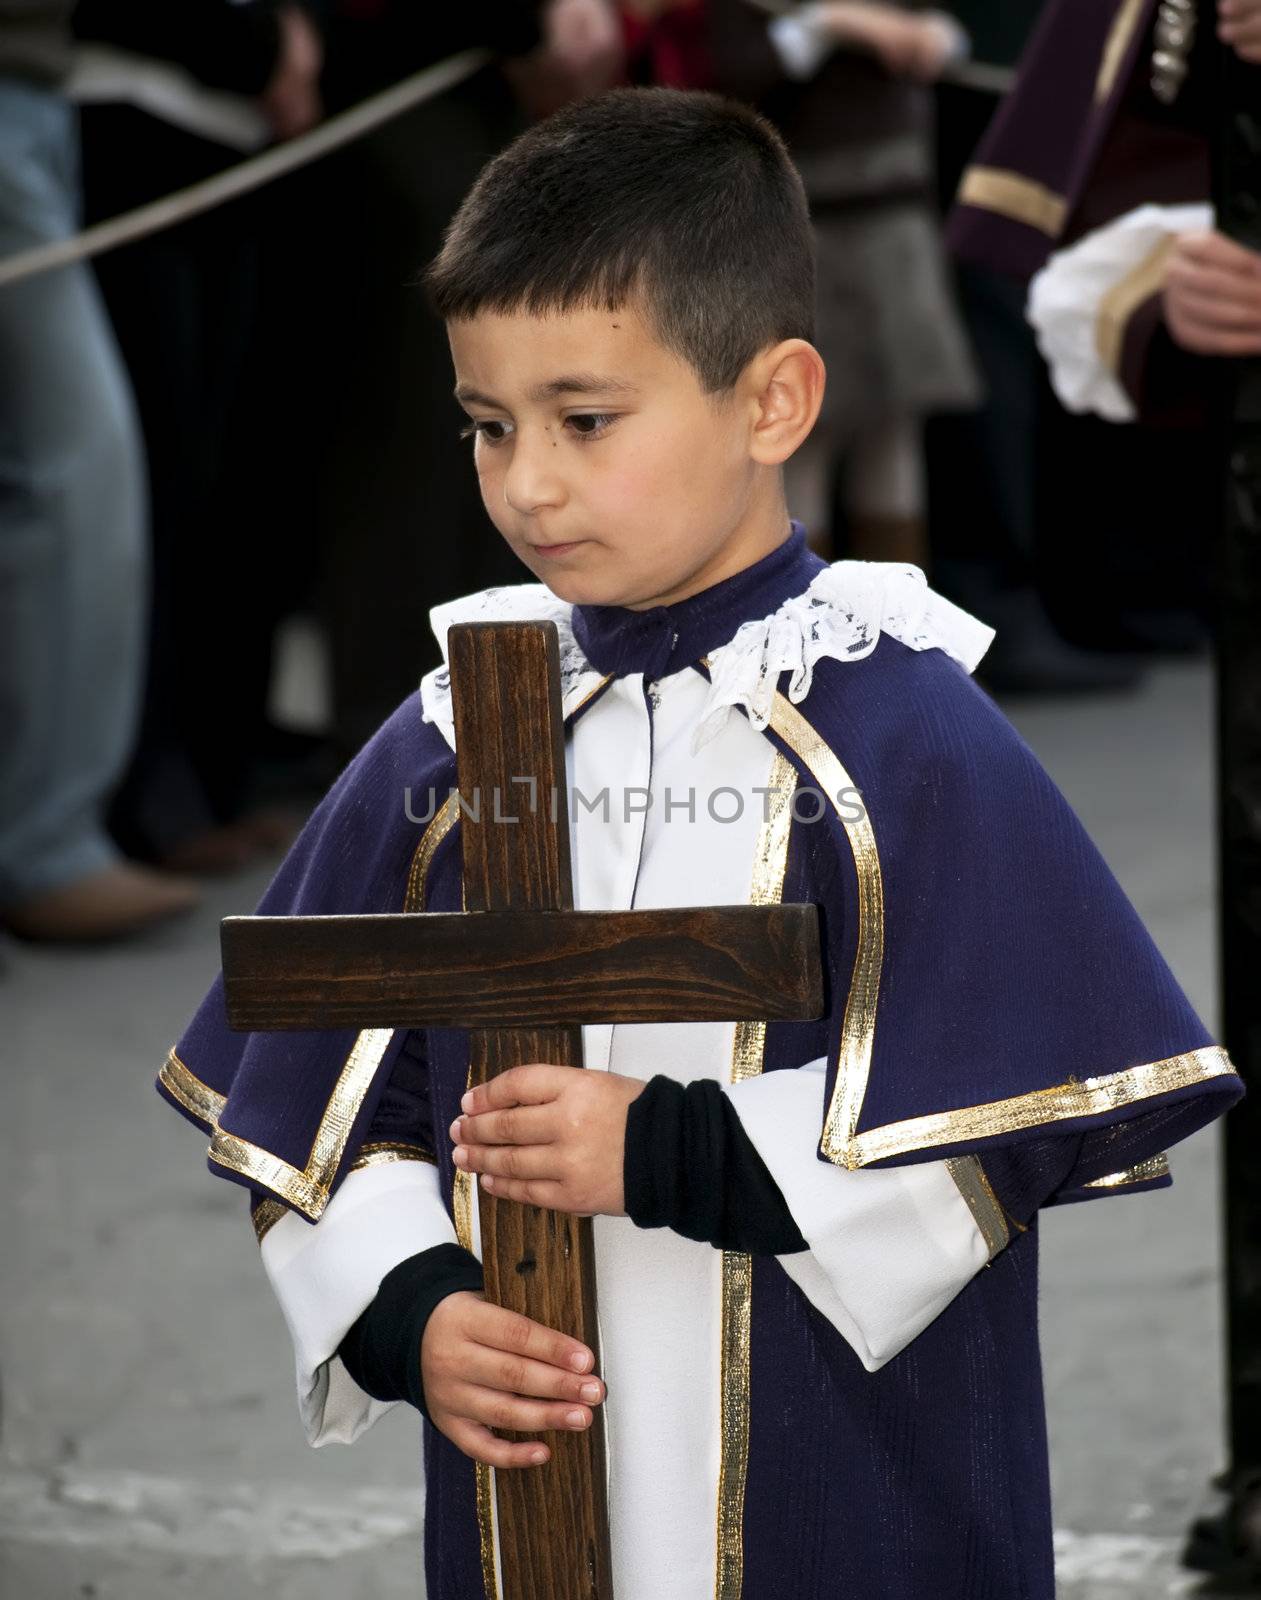 LUQA, MALTA - Friday 10th April 2009 - Little boy carrying cross during the Good Friday procession in Malta